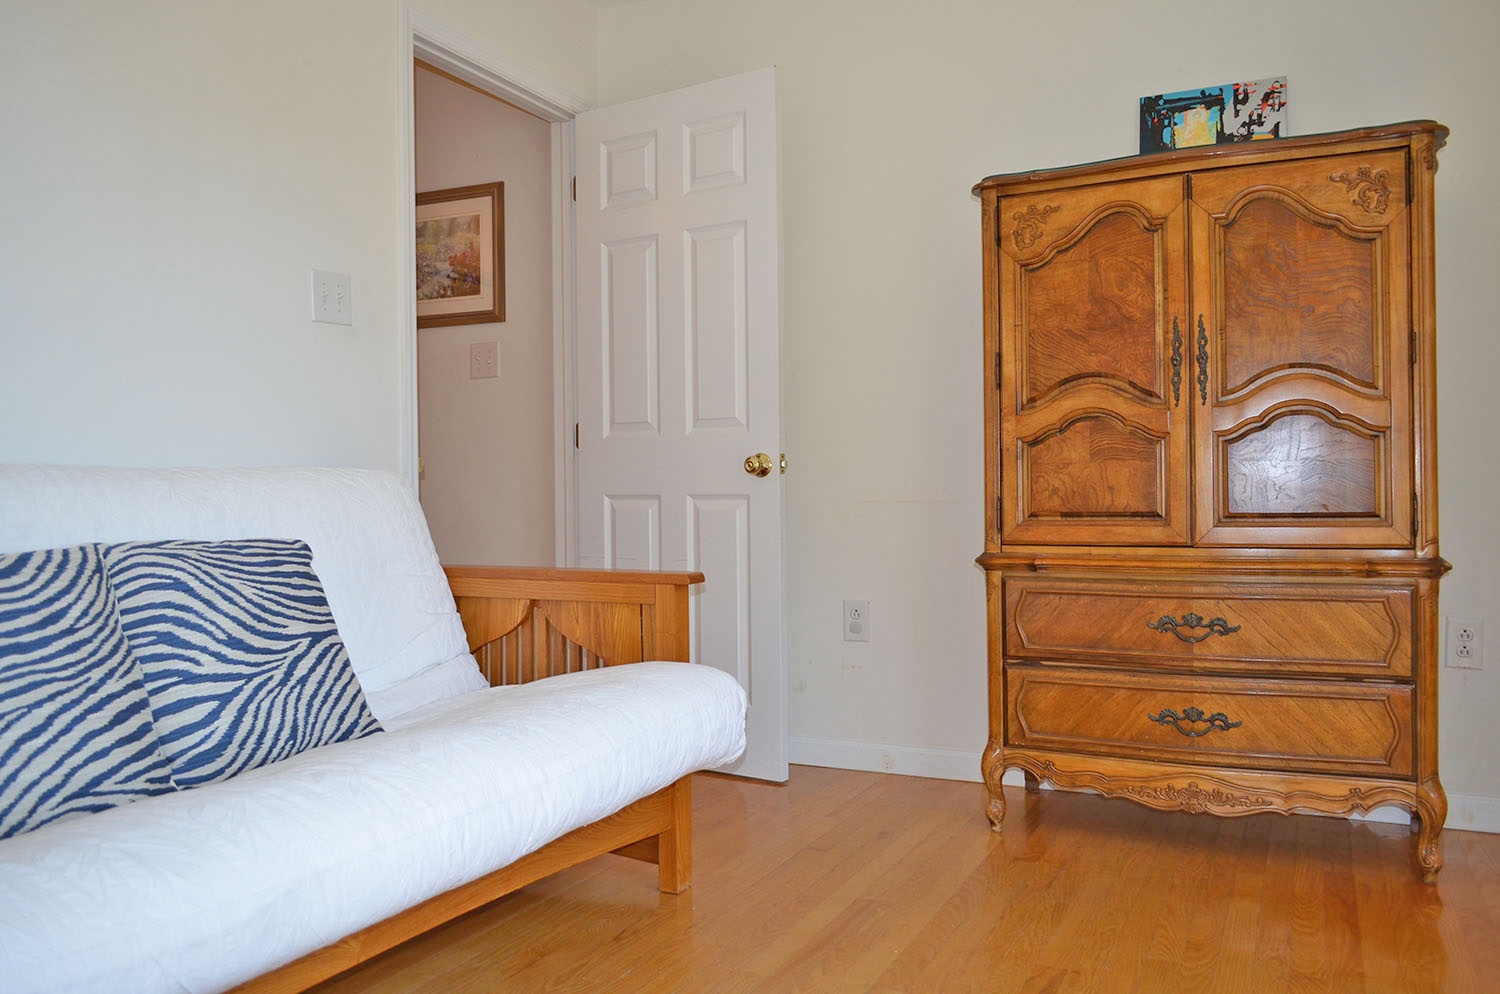 The 3rd bedroom is perfect for a quiet retreat or sleeping area.